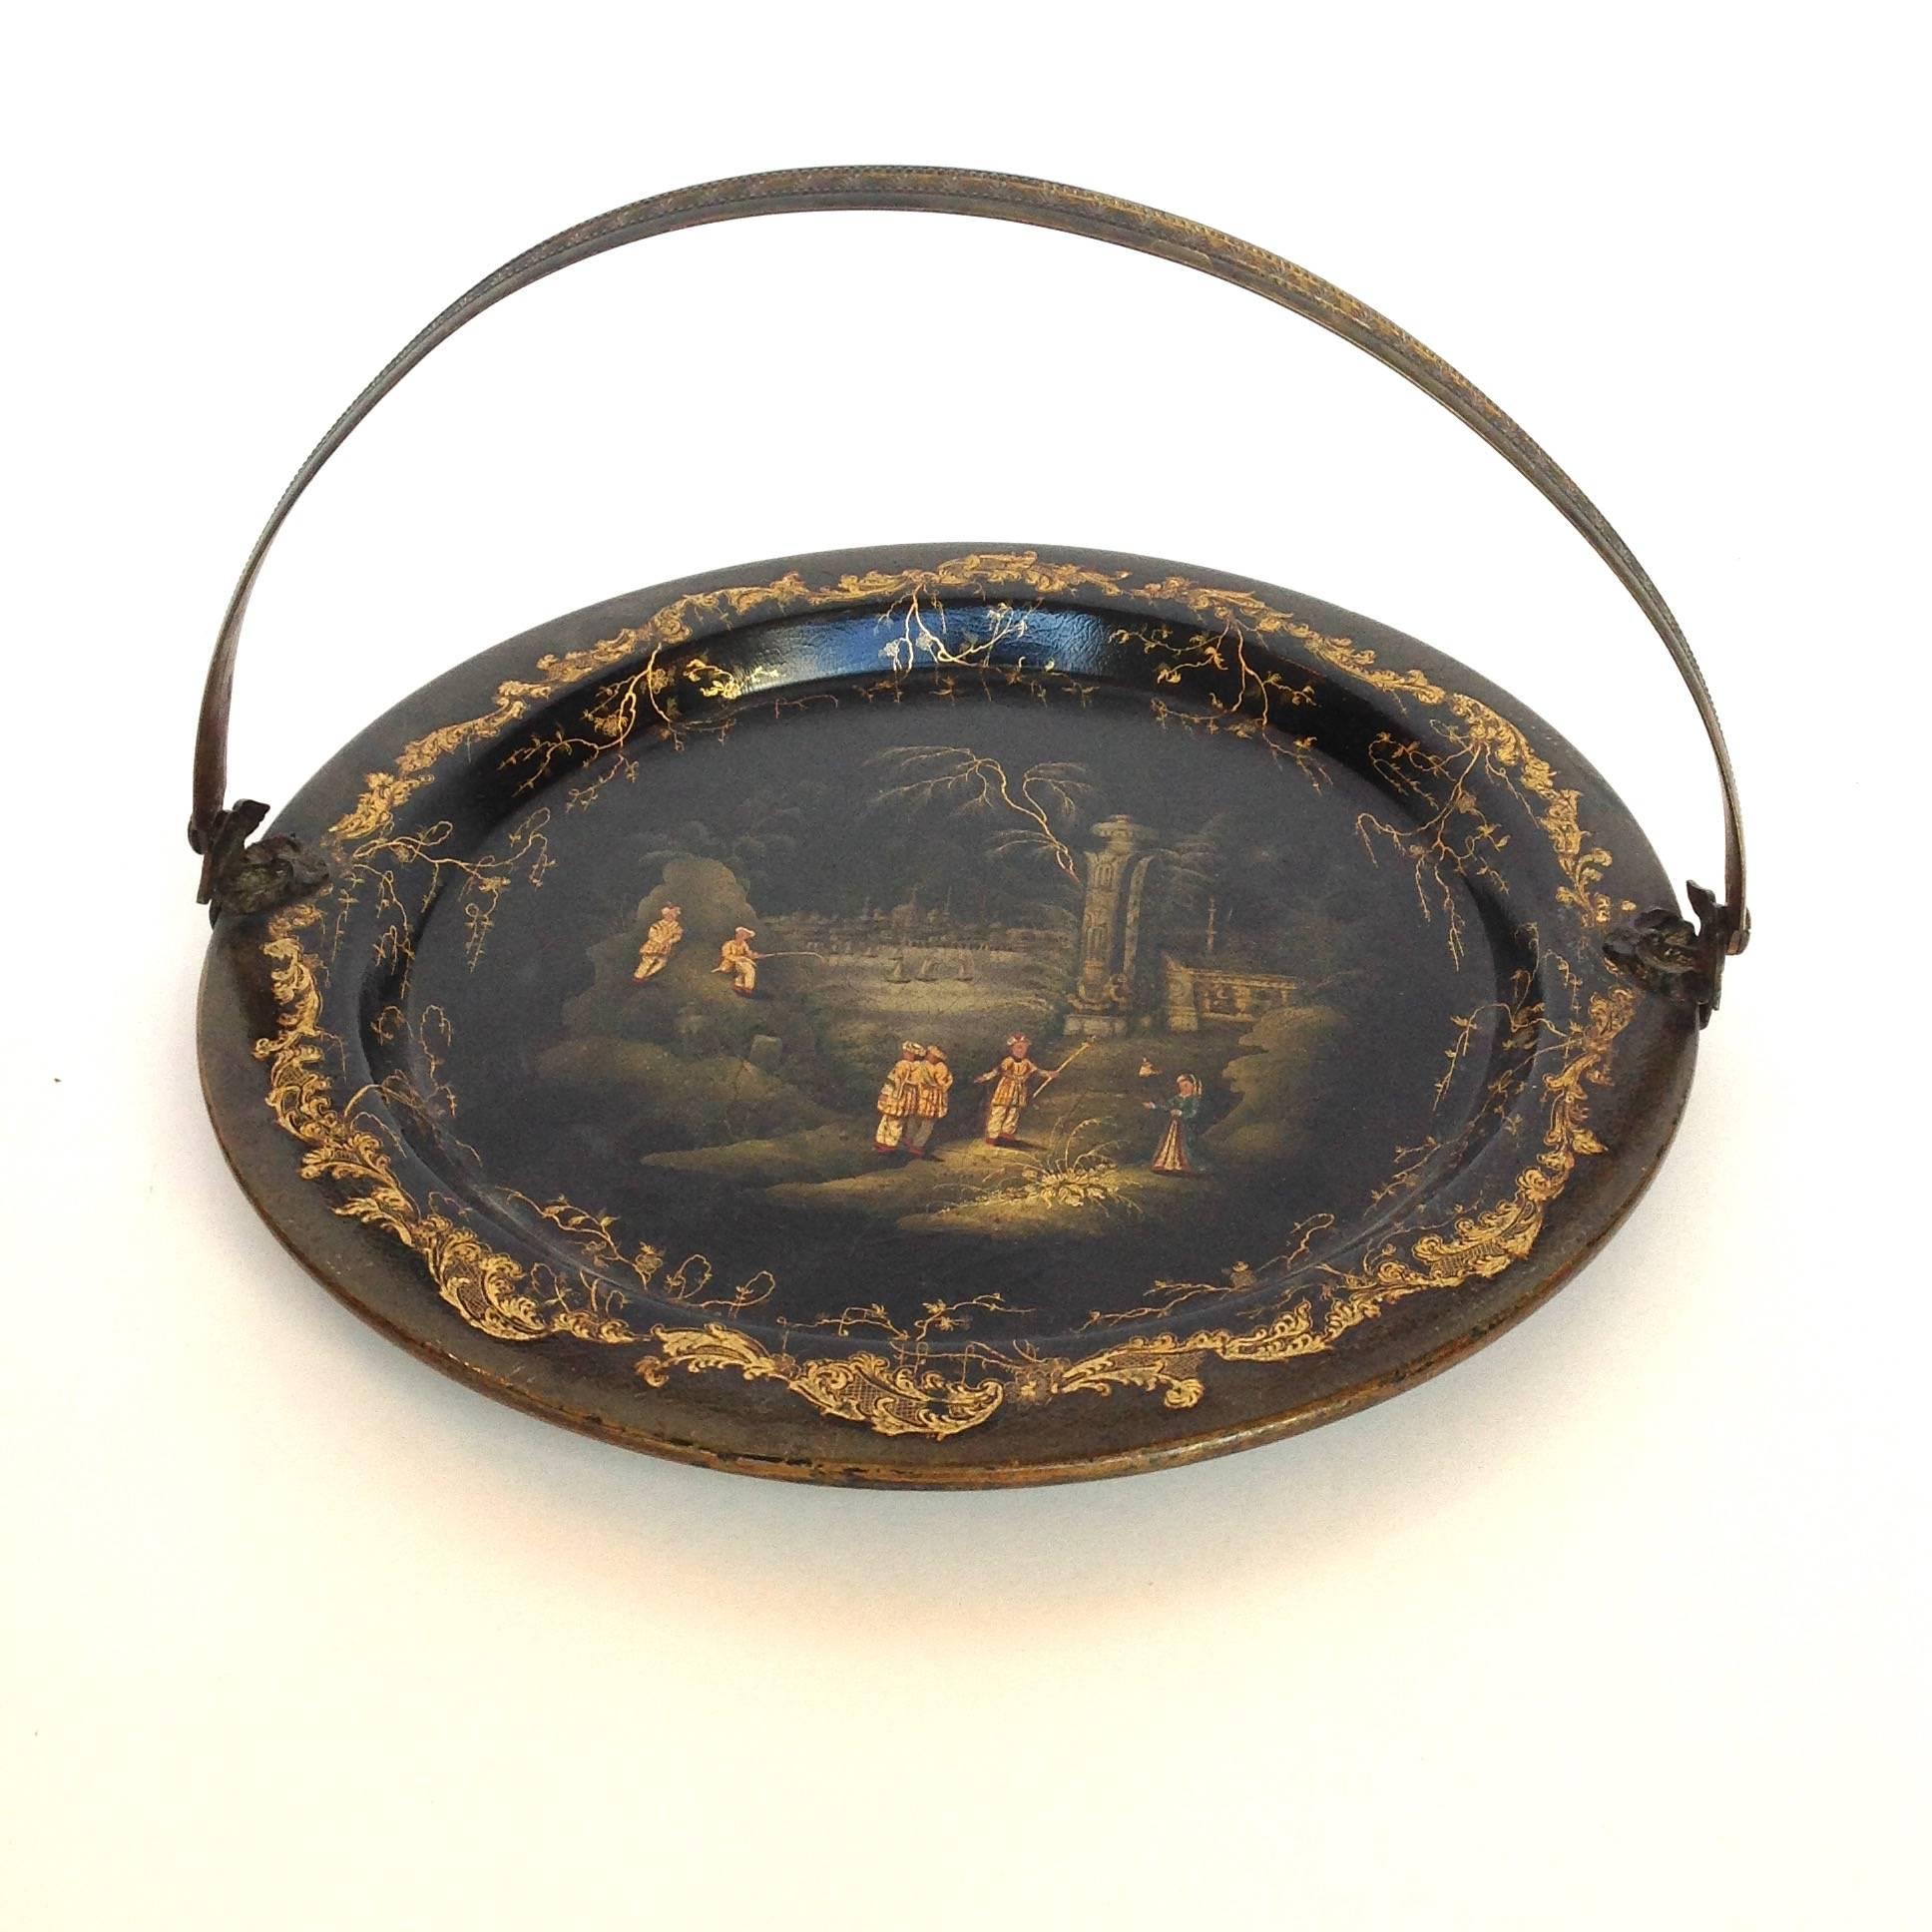 Antique English black papier mâché tray with chinoiserie gilt decoration and a metal swing handle. There is an impressed mark on bottom Clay, King St. Covt Garden, circa early 19th century.
Henry Clay of Birmingham set up his papier mâché business